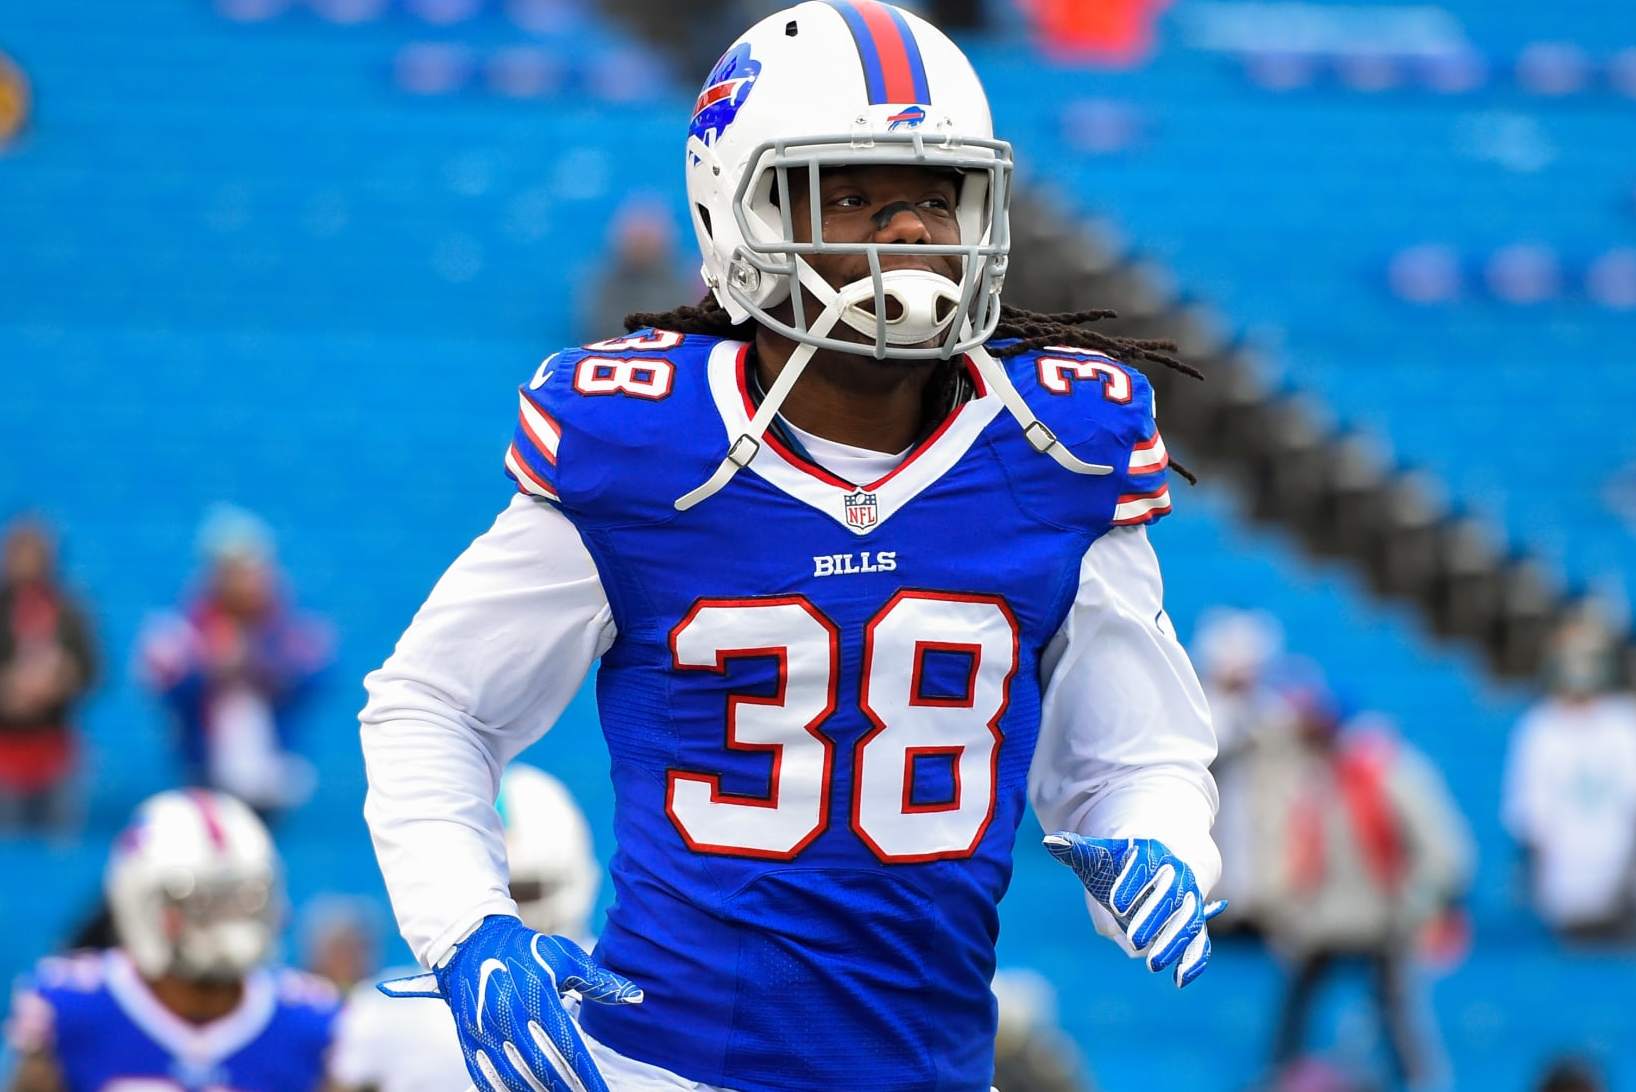 Buffalo Bills 16-22 New York Jets: Xavier Gipson wins it in overtime with  punt return touchdown after Aaron Rodgers injury